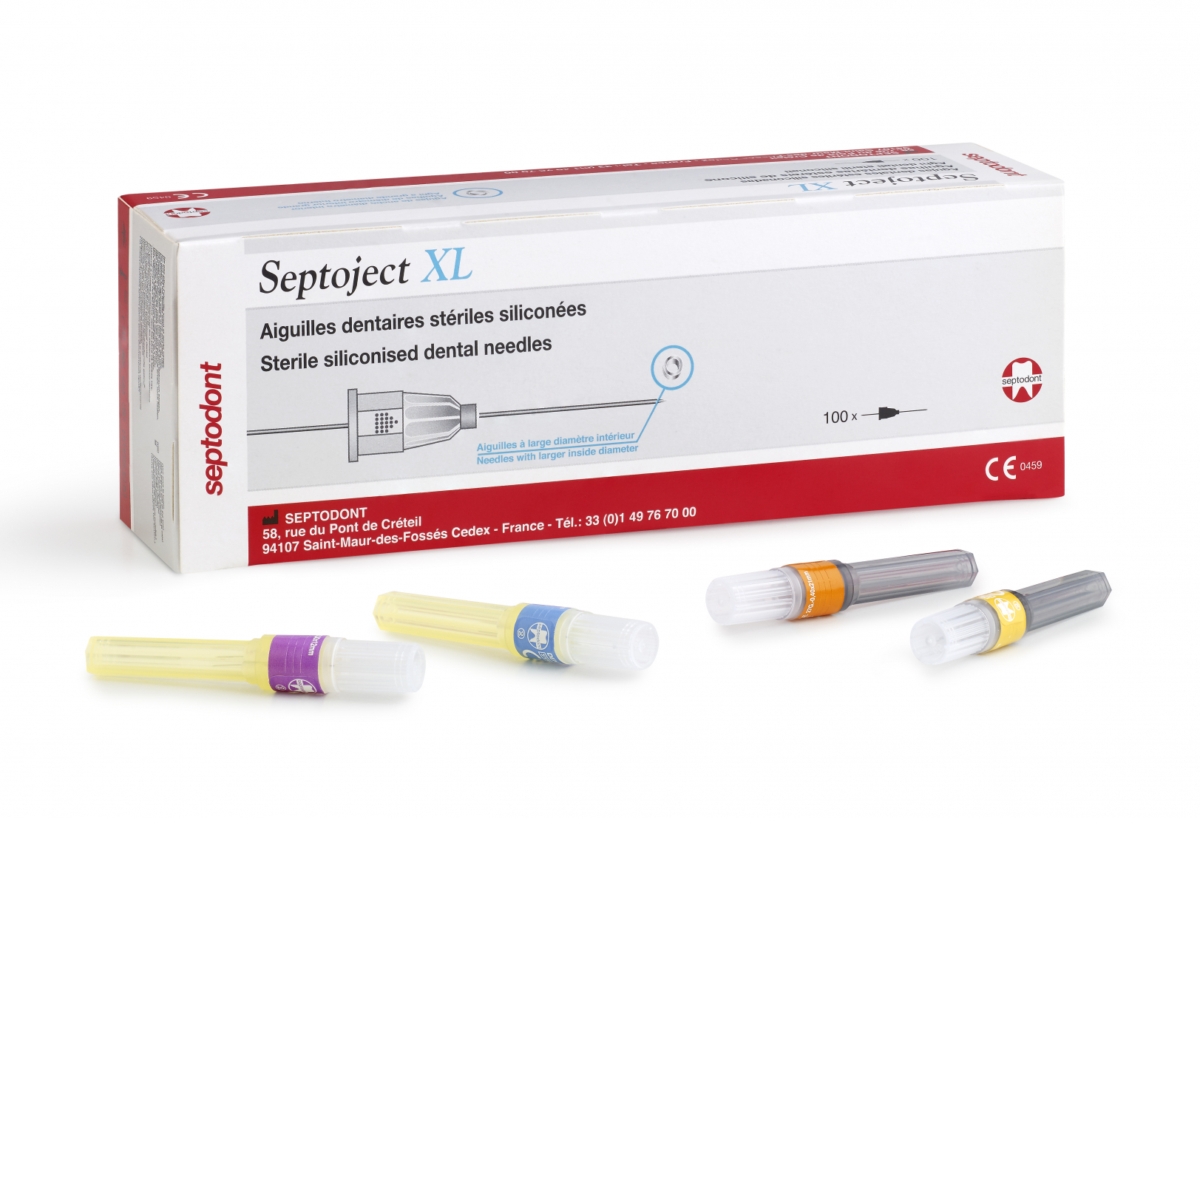 AGHI SEPTOJECT XL 11657C 30G 0,3x10mm 100pz